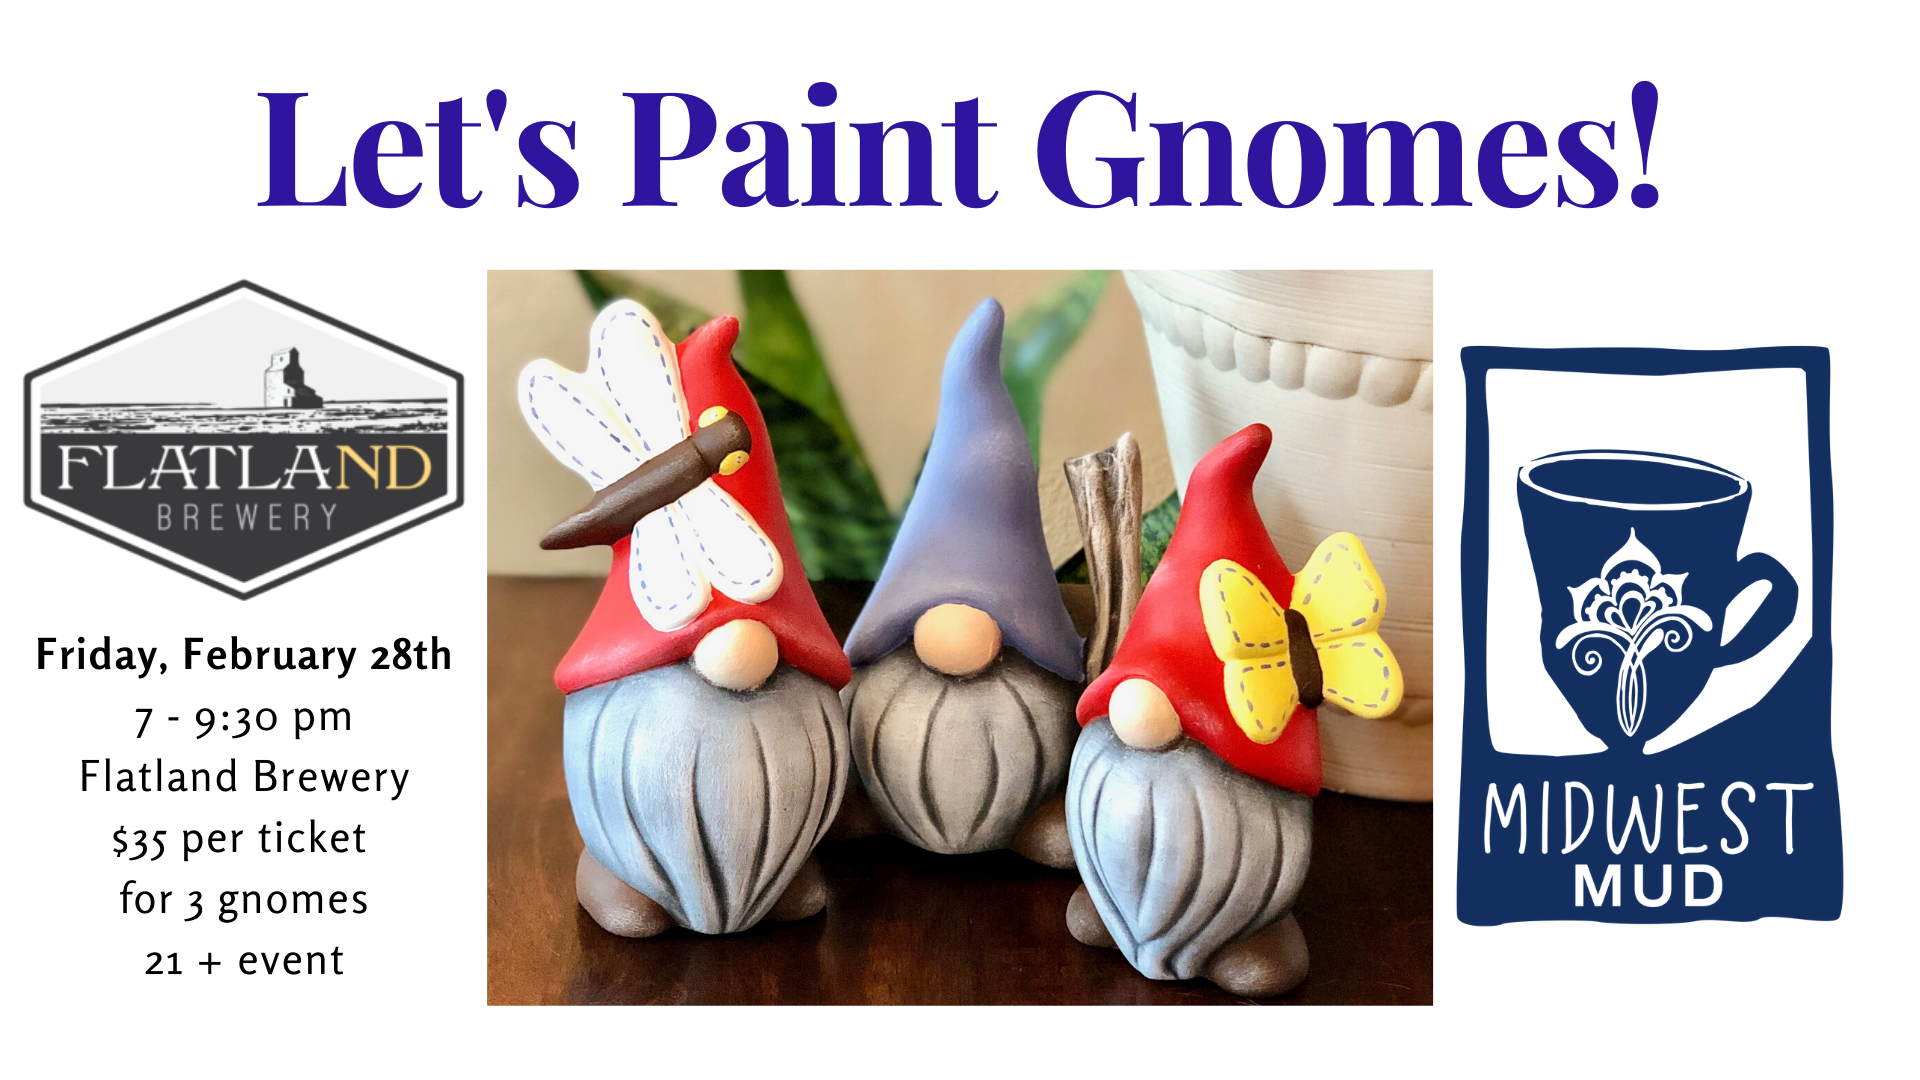 Let's Paint Gnomes at Flatland Brewery - February!